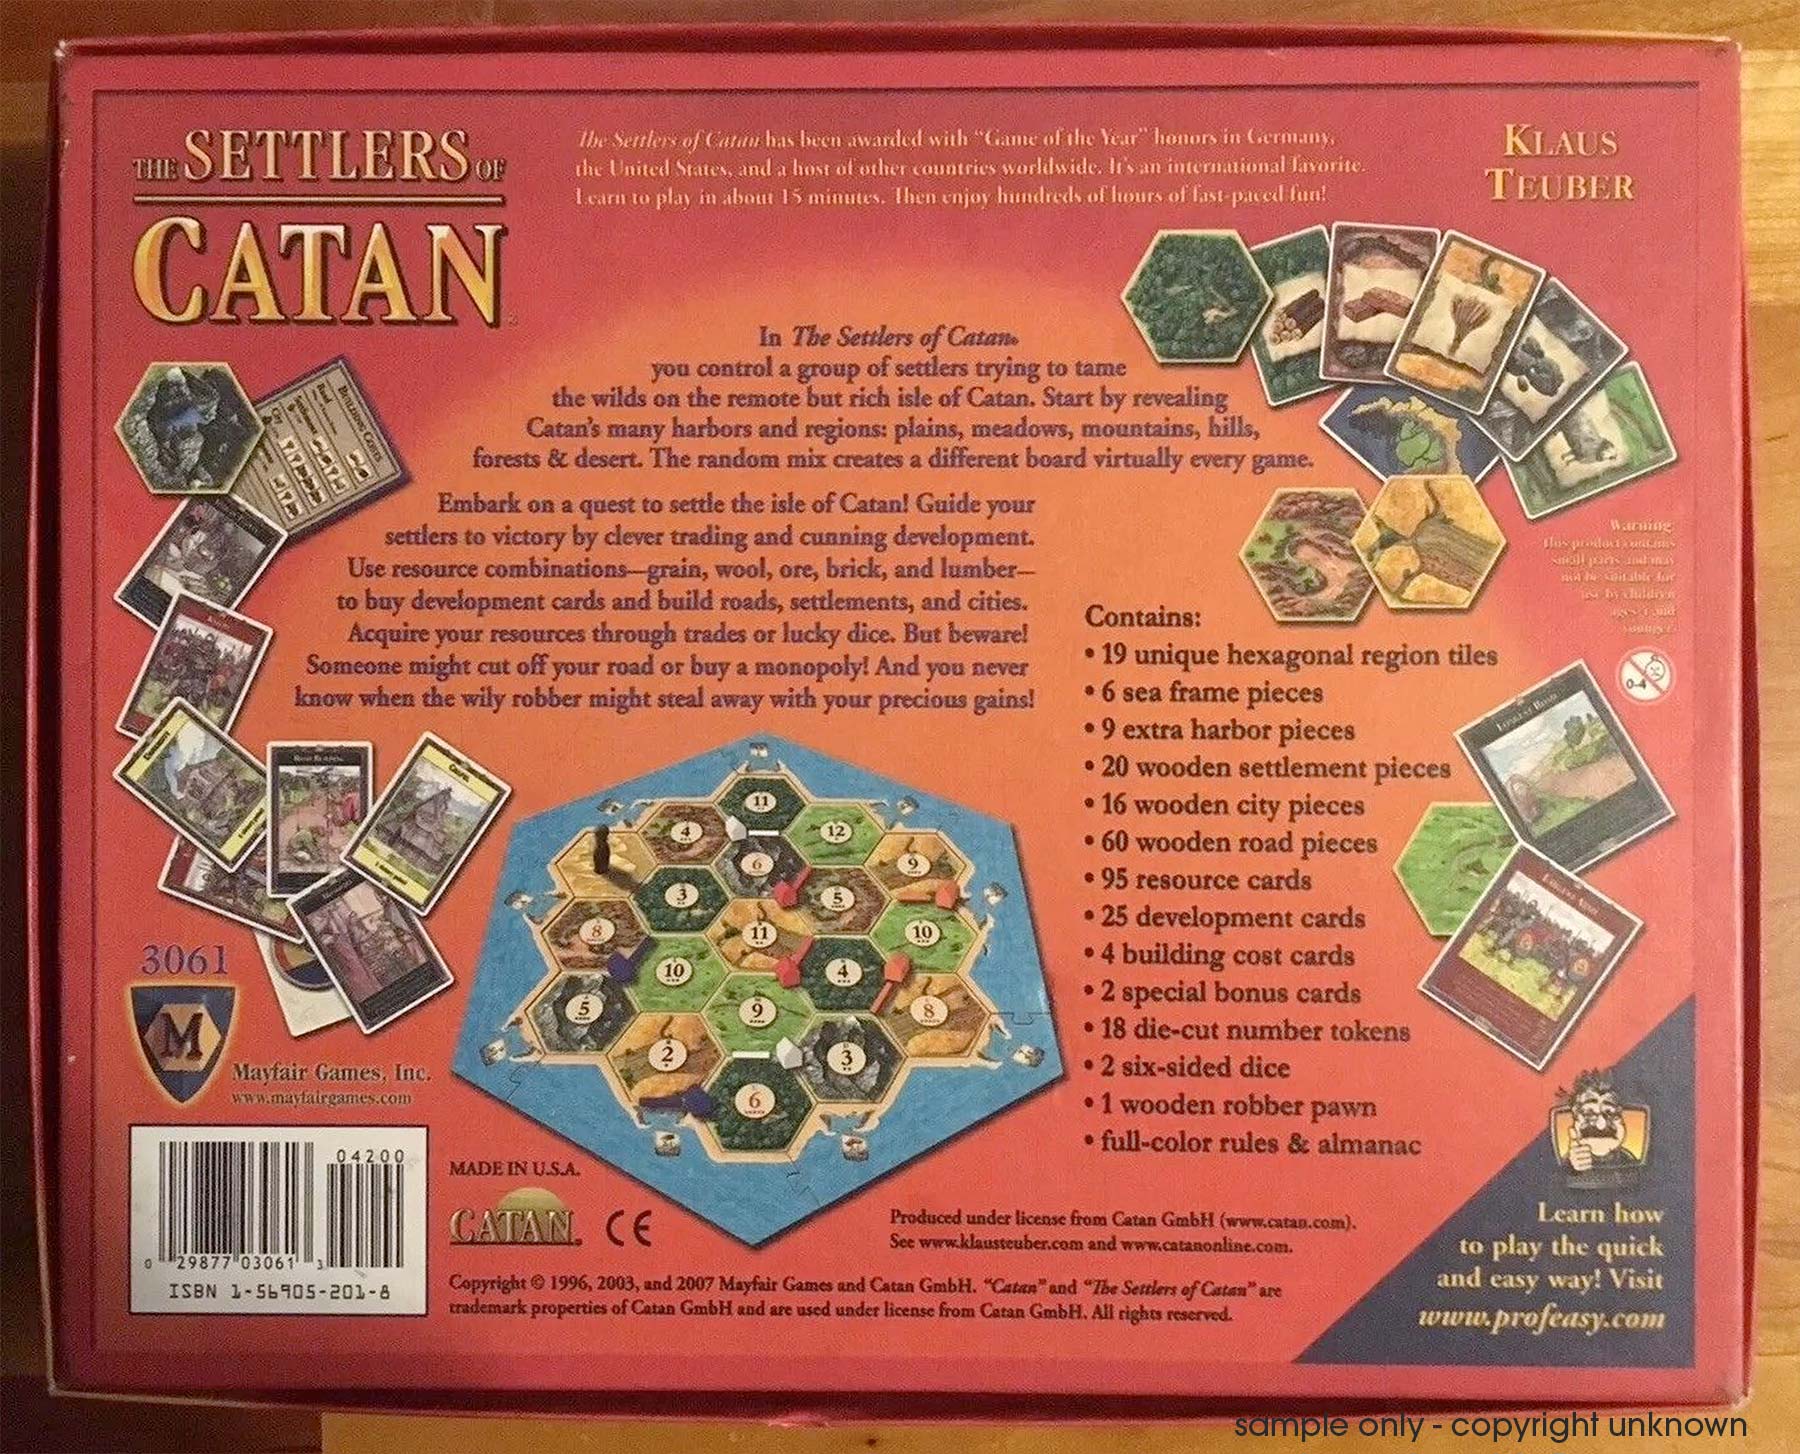 Orange All-72 for sale online Catan Studio Catan 5th Edition Cities & Knights Wood Base Set 